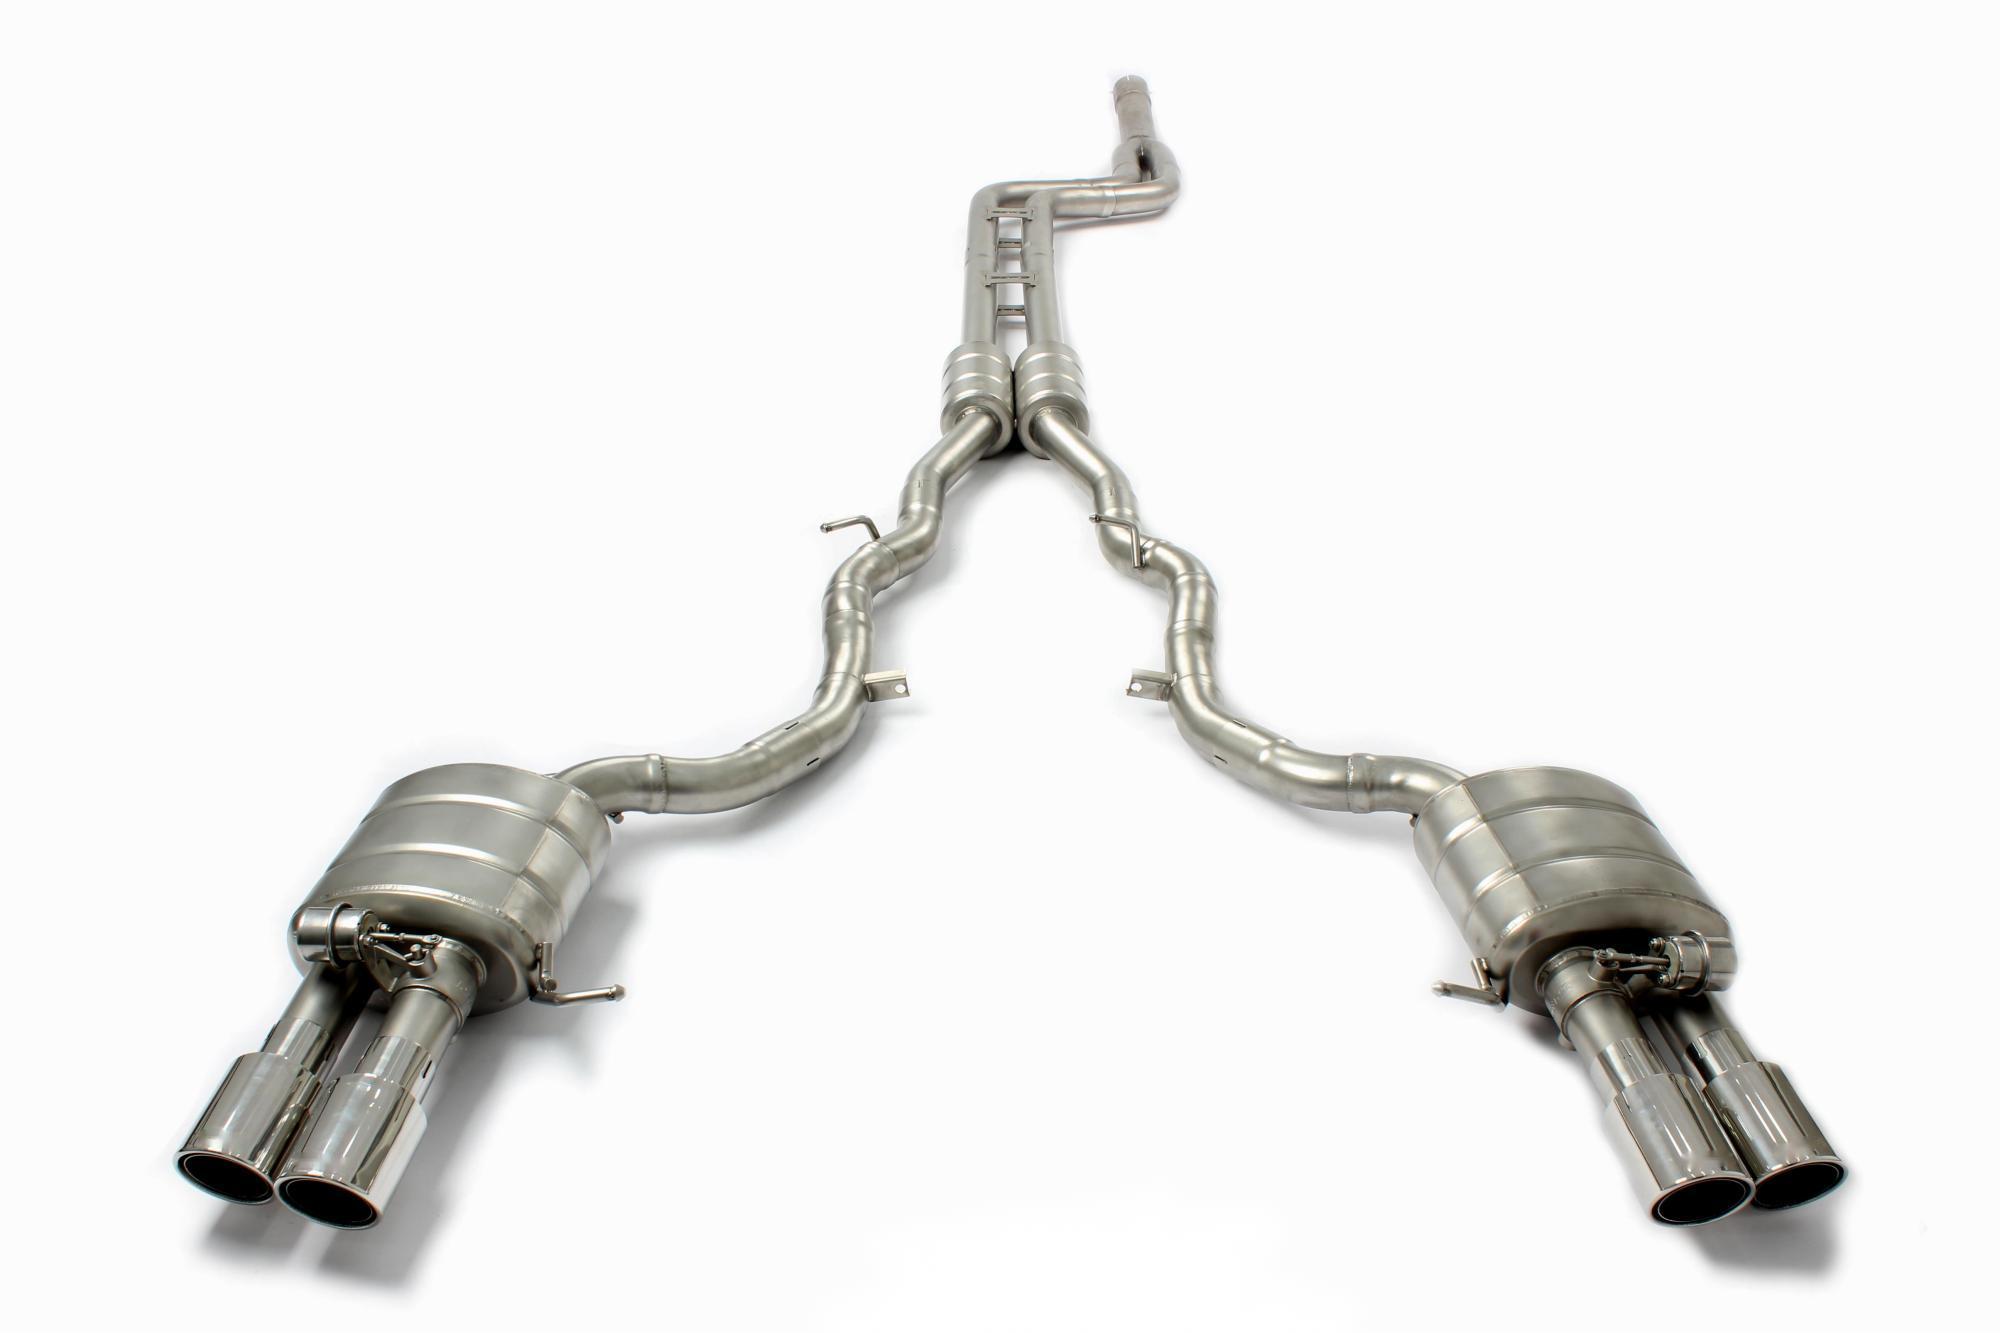 BMW 6 series stainless steel exhaust catback